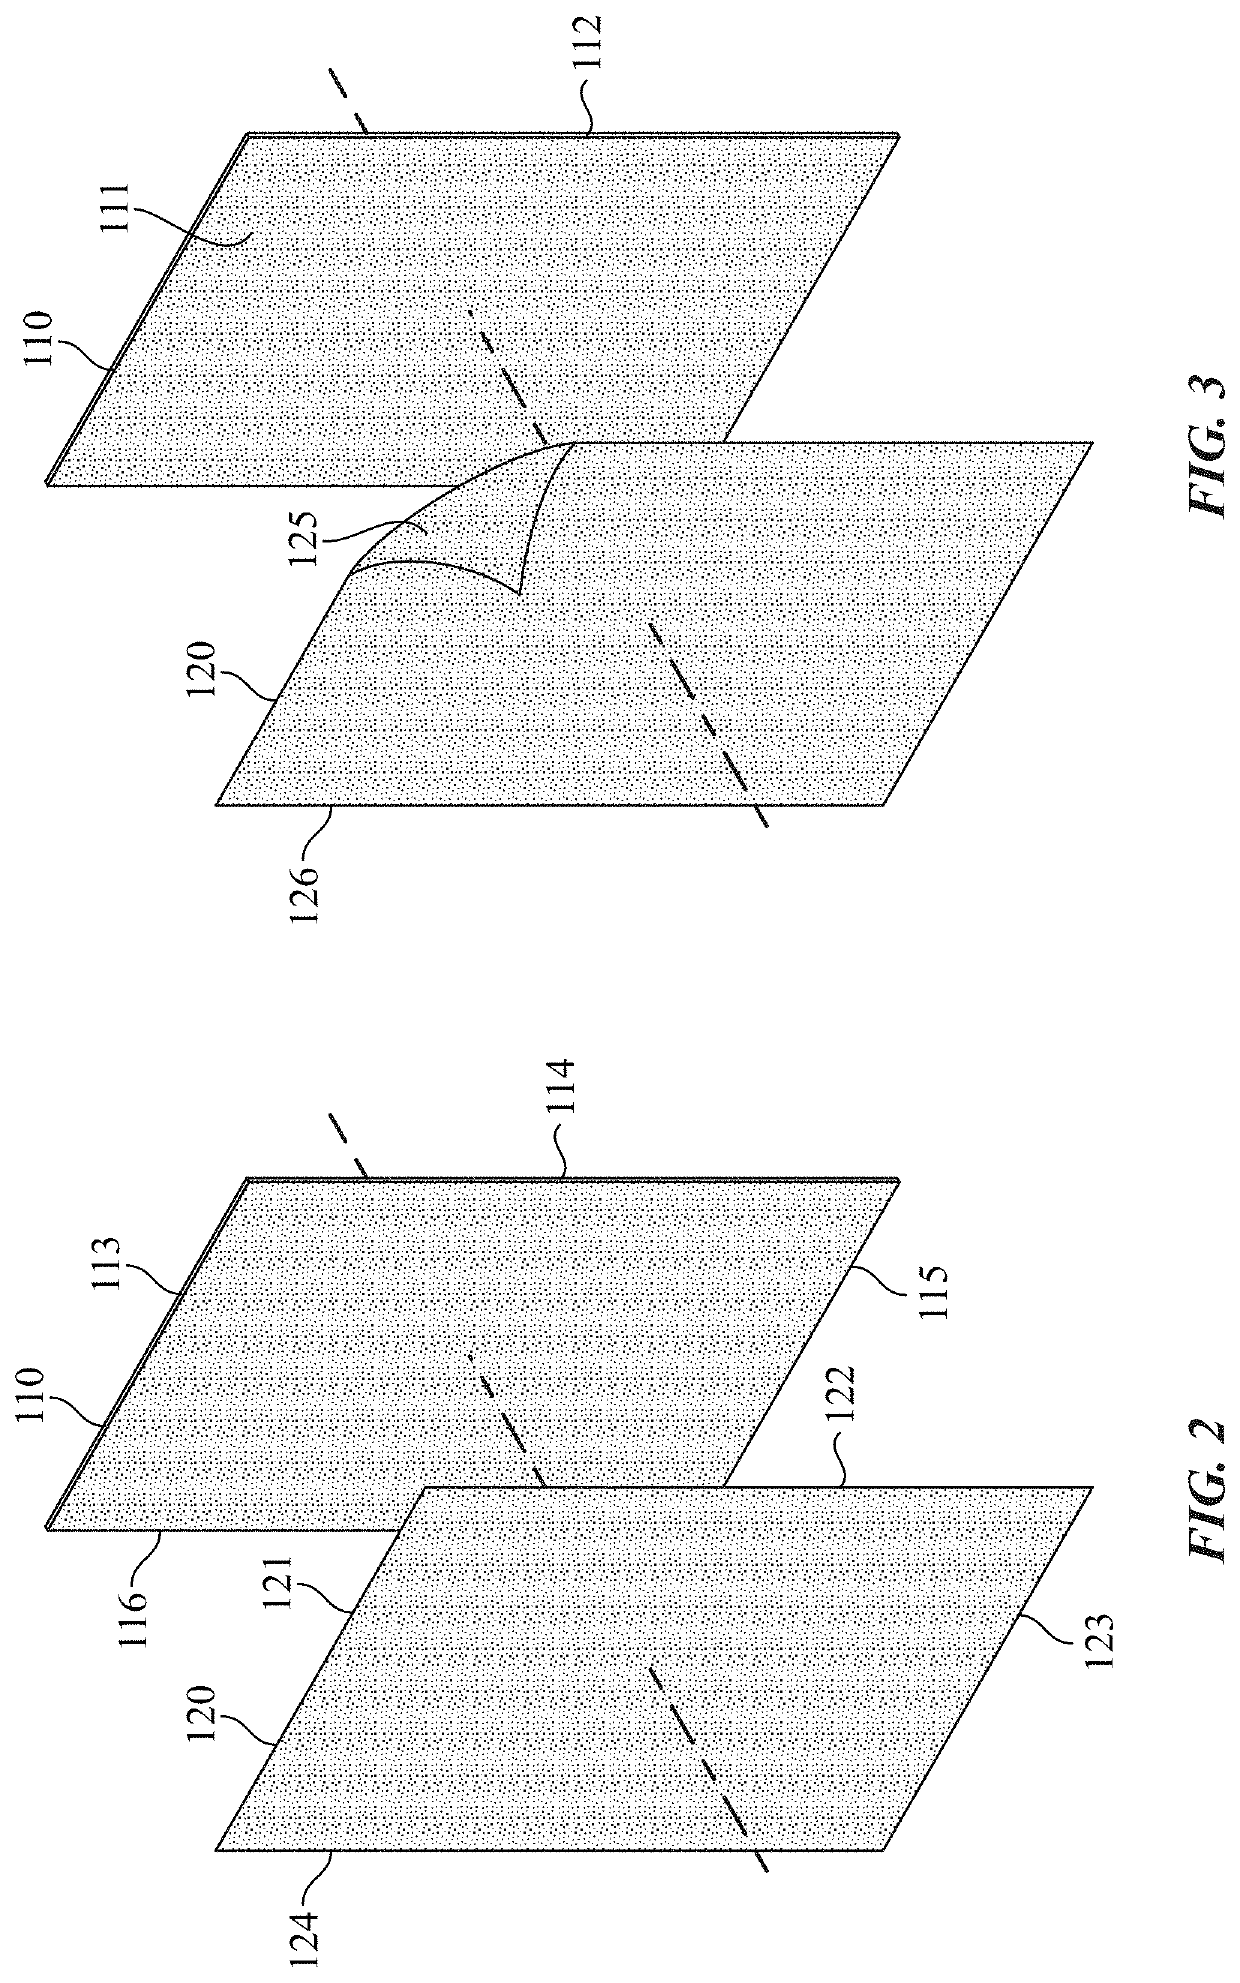 Erasable watermedia surface system and method of use